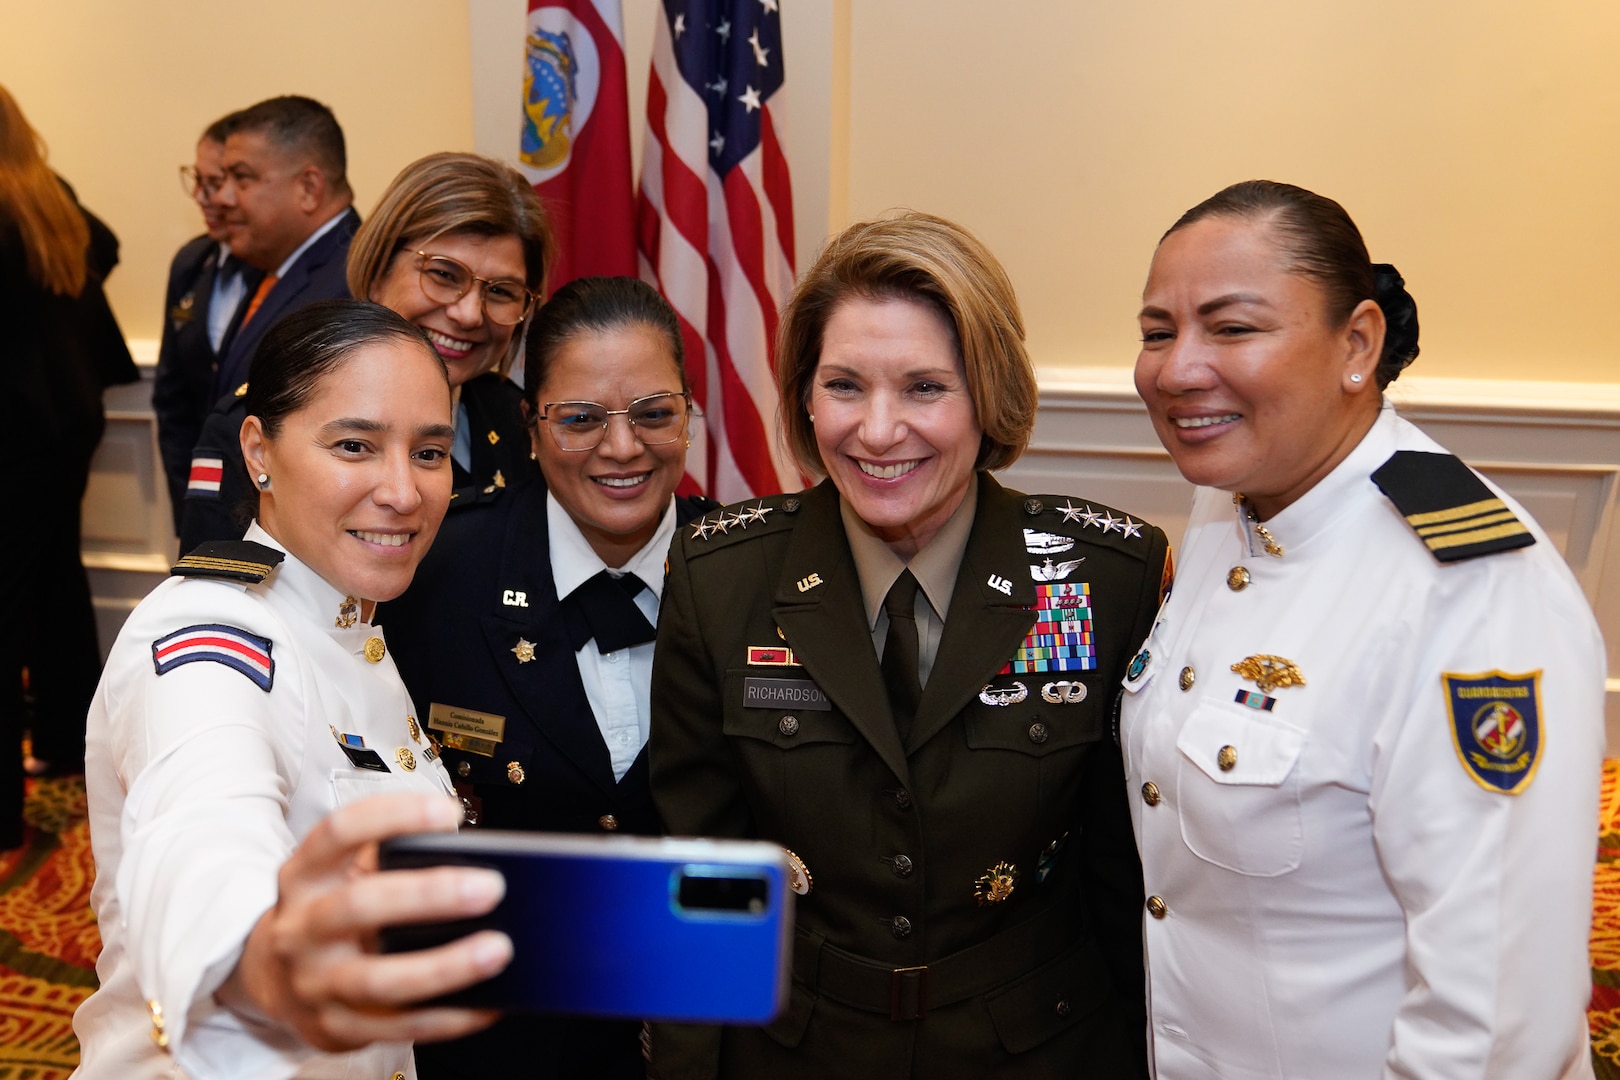 U.S. Army Gen. Laura Richardson, the commander of U.S. Southern Command, poses for a photo with members of the Public Force of Costa Rica during a Women, Peace, and Security roundtable discussion.